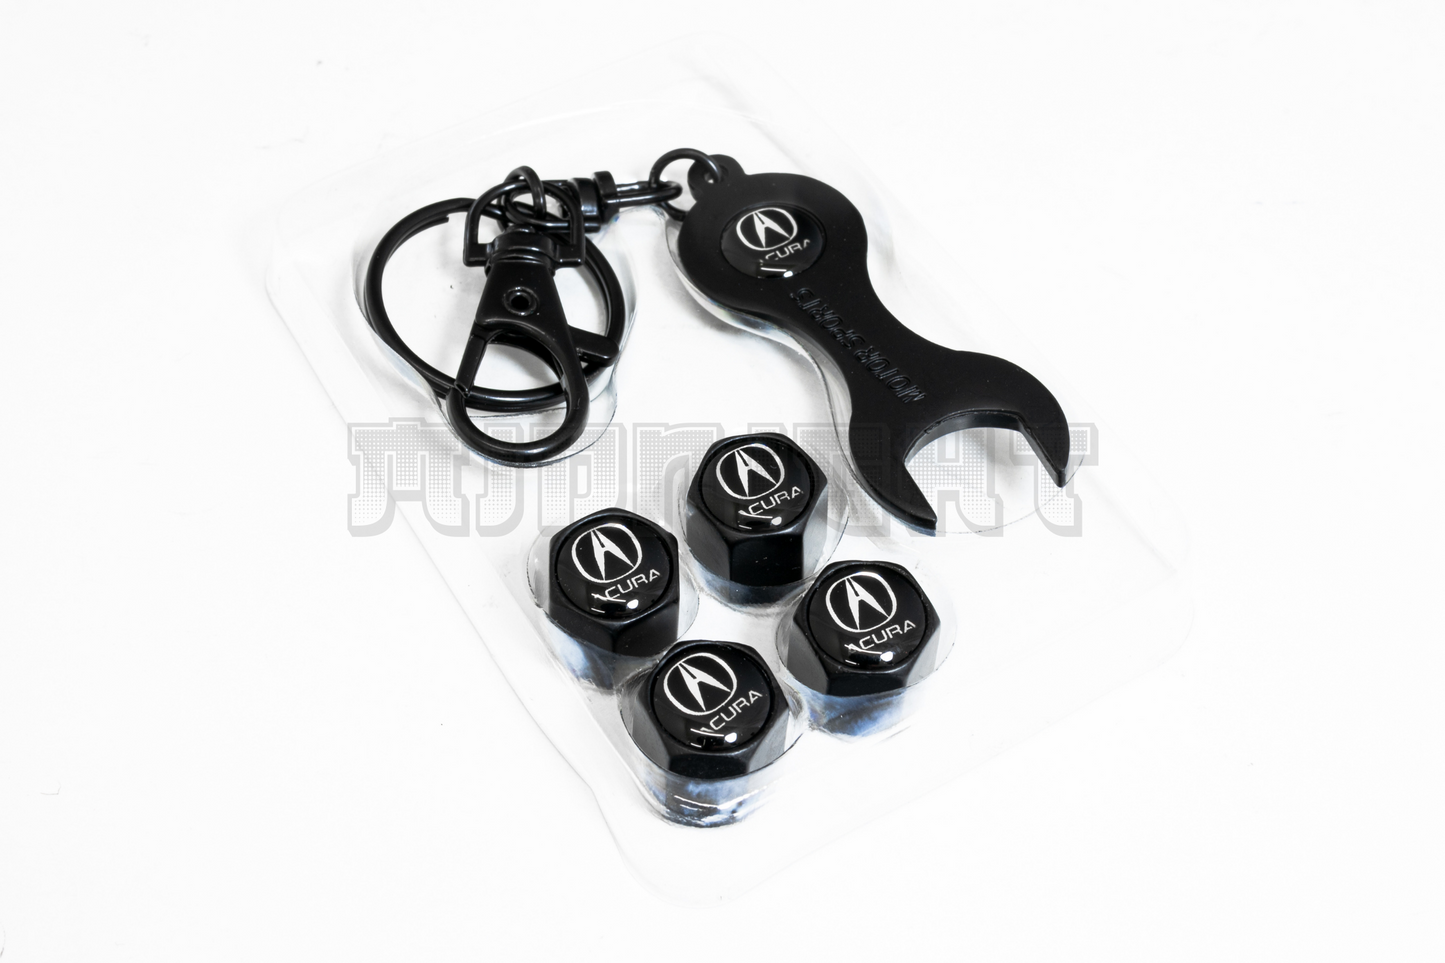 Acura Valve Stem Caps With Wrench Keychain